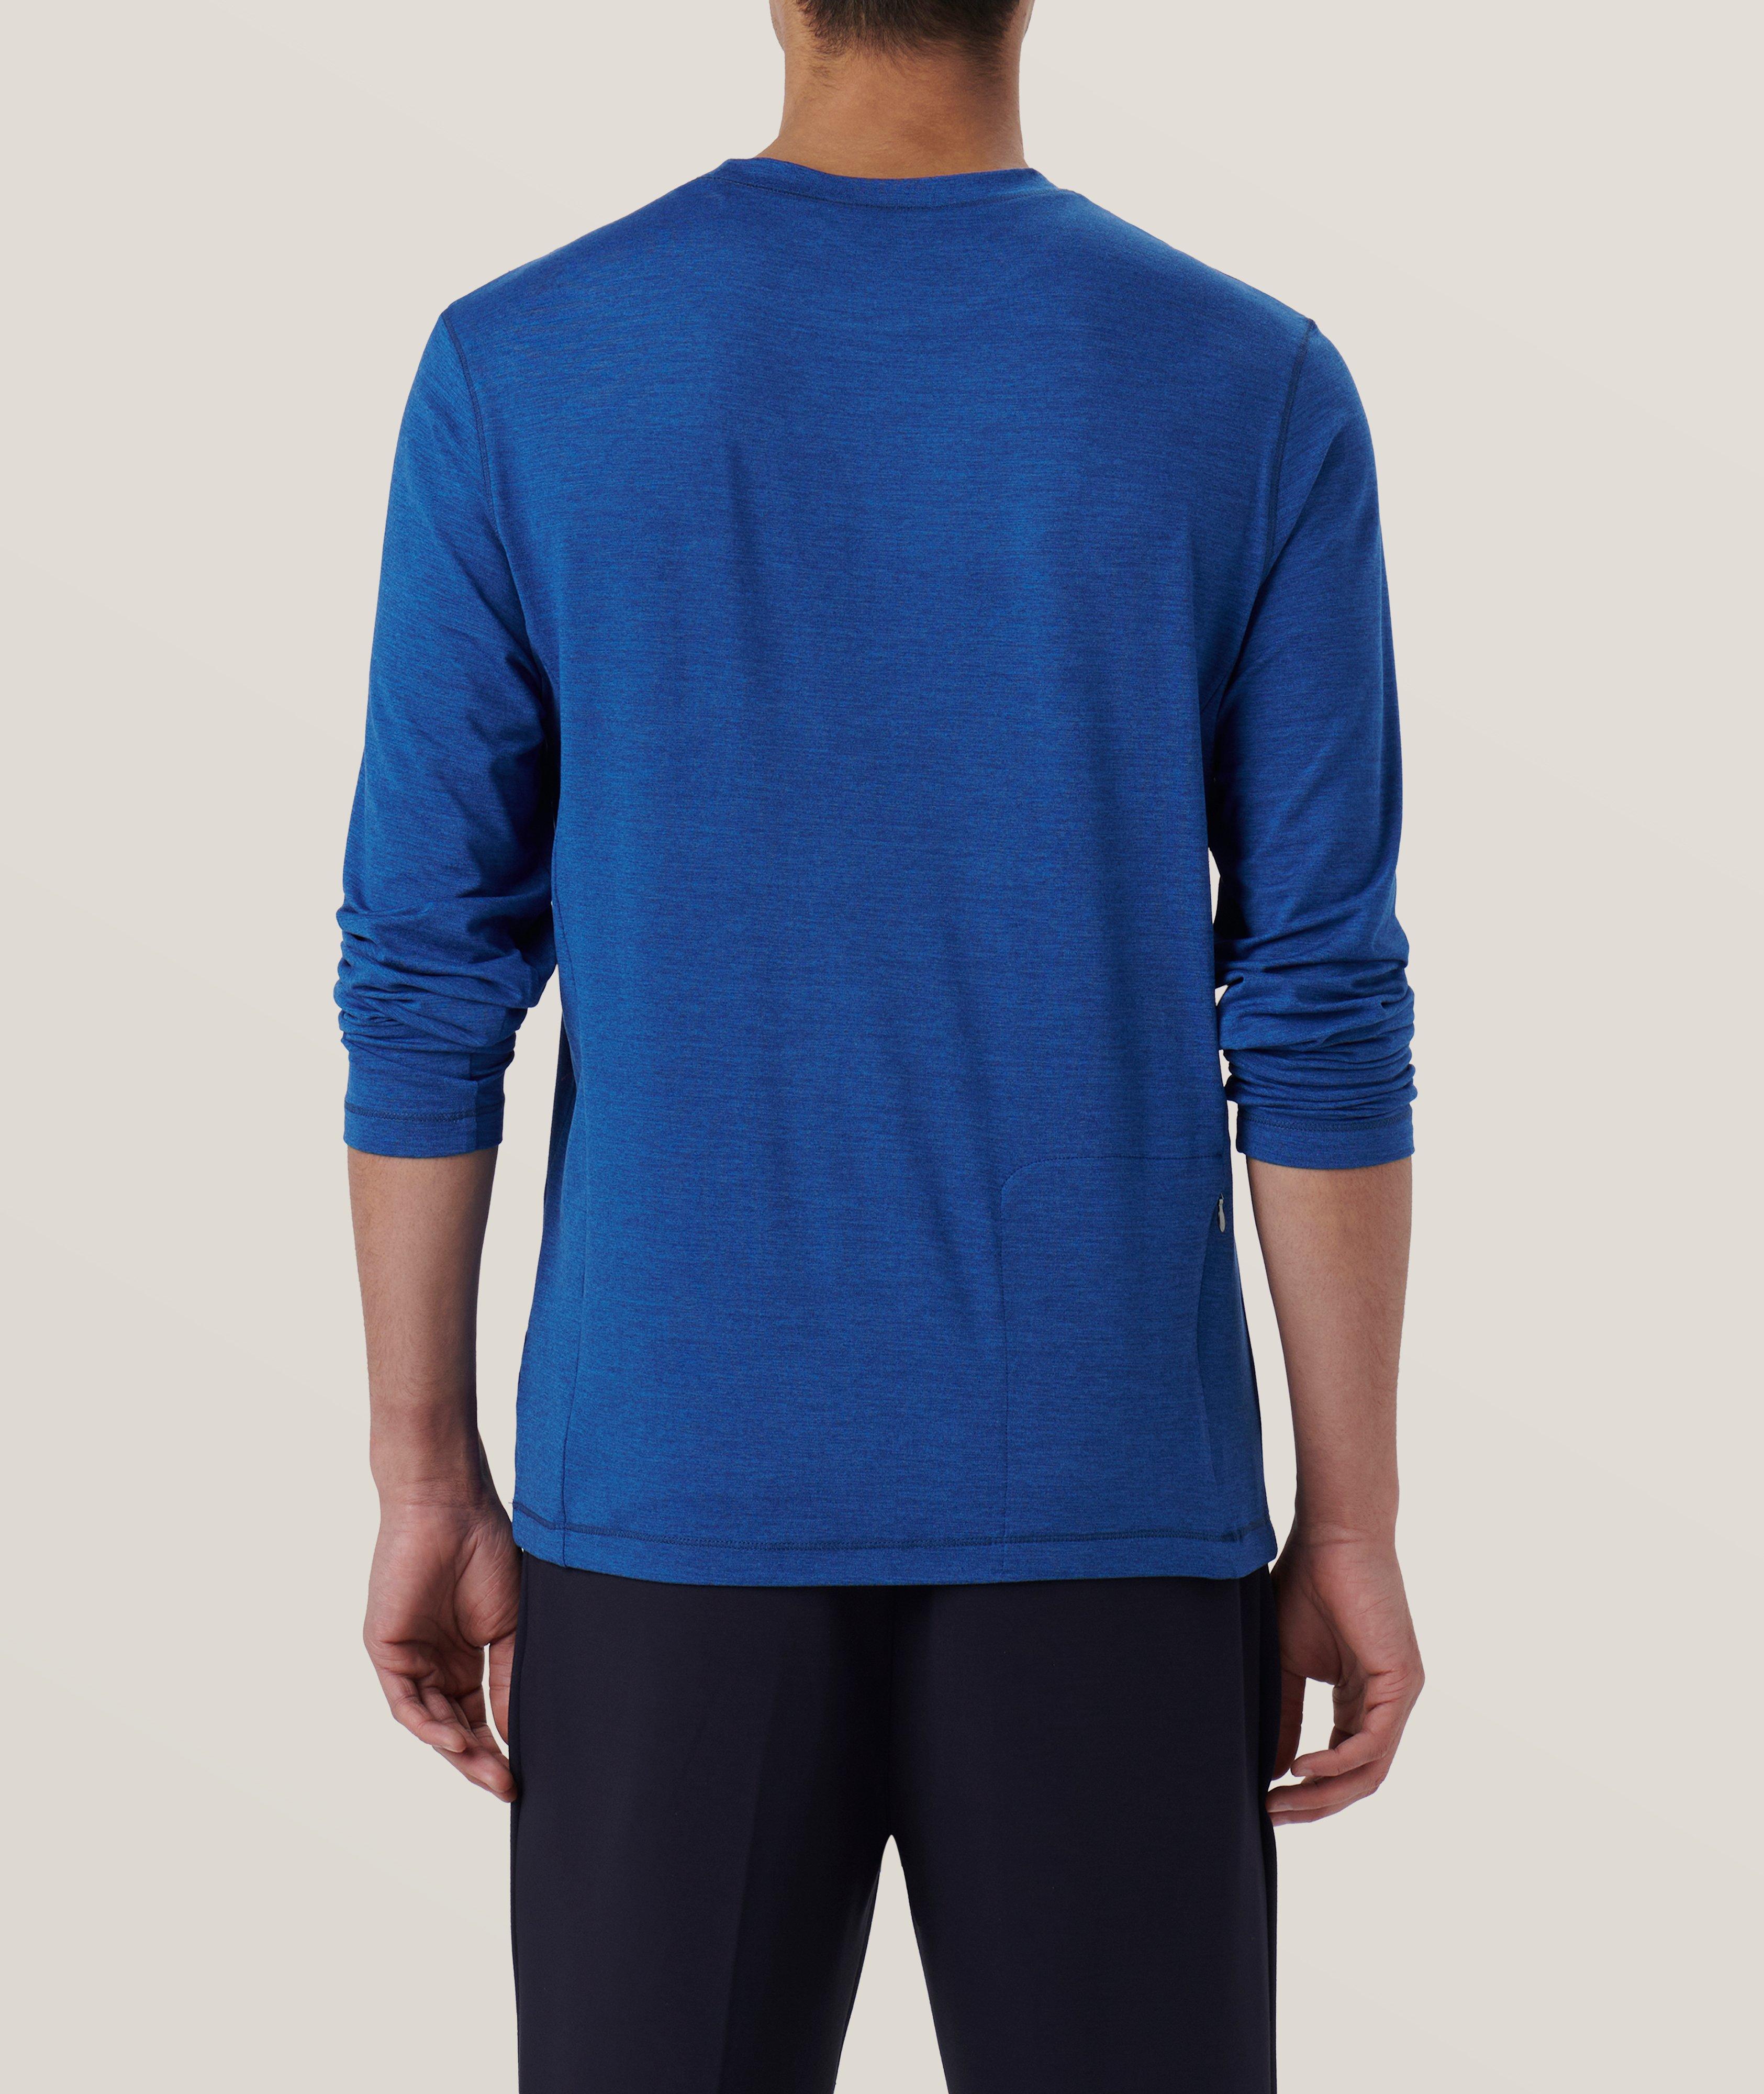 4-Way Stretch UV50 Performance Pullover image 4